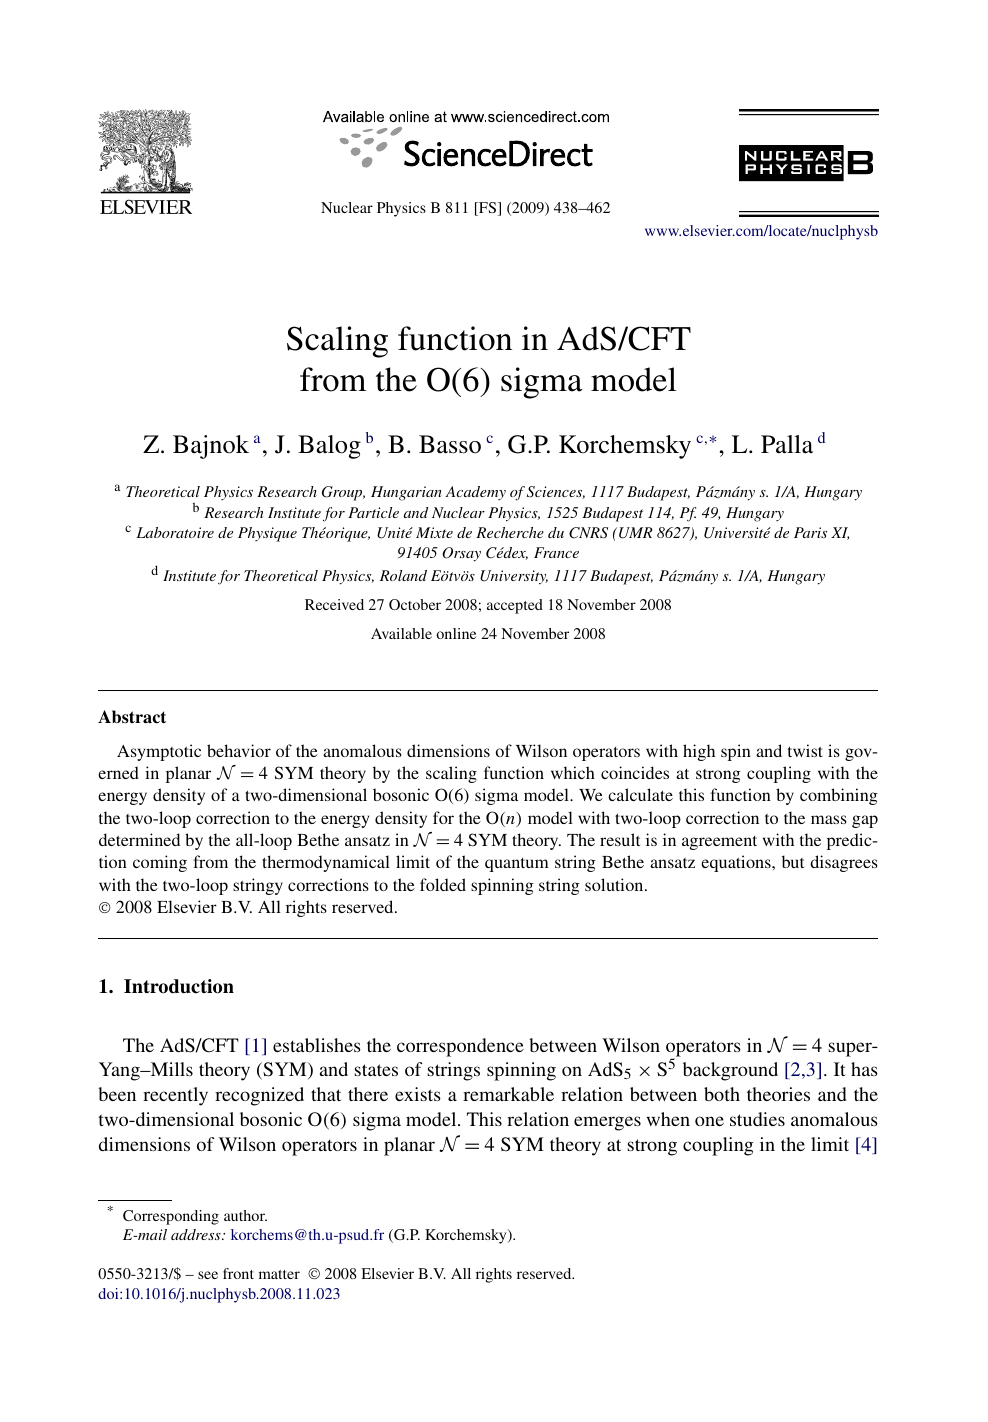 Scaling Function In Ads Cft From The O 6 Sigma Model Topic Of Research Paper In Physical Sciences Download Scholarly Article Pdf And Read For Free On Cyberleninka Open Science Hub